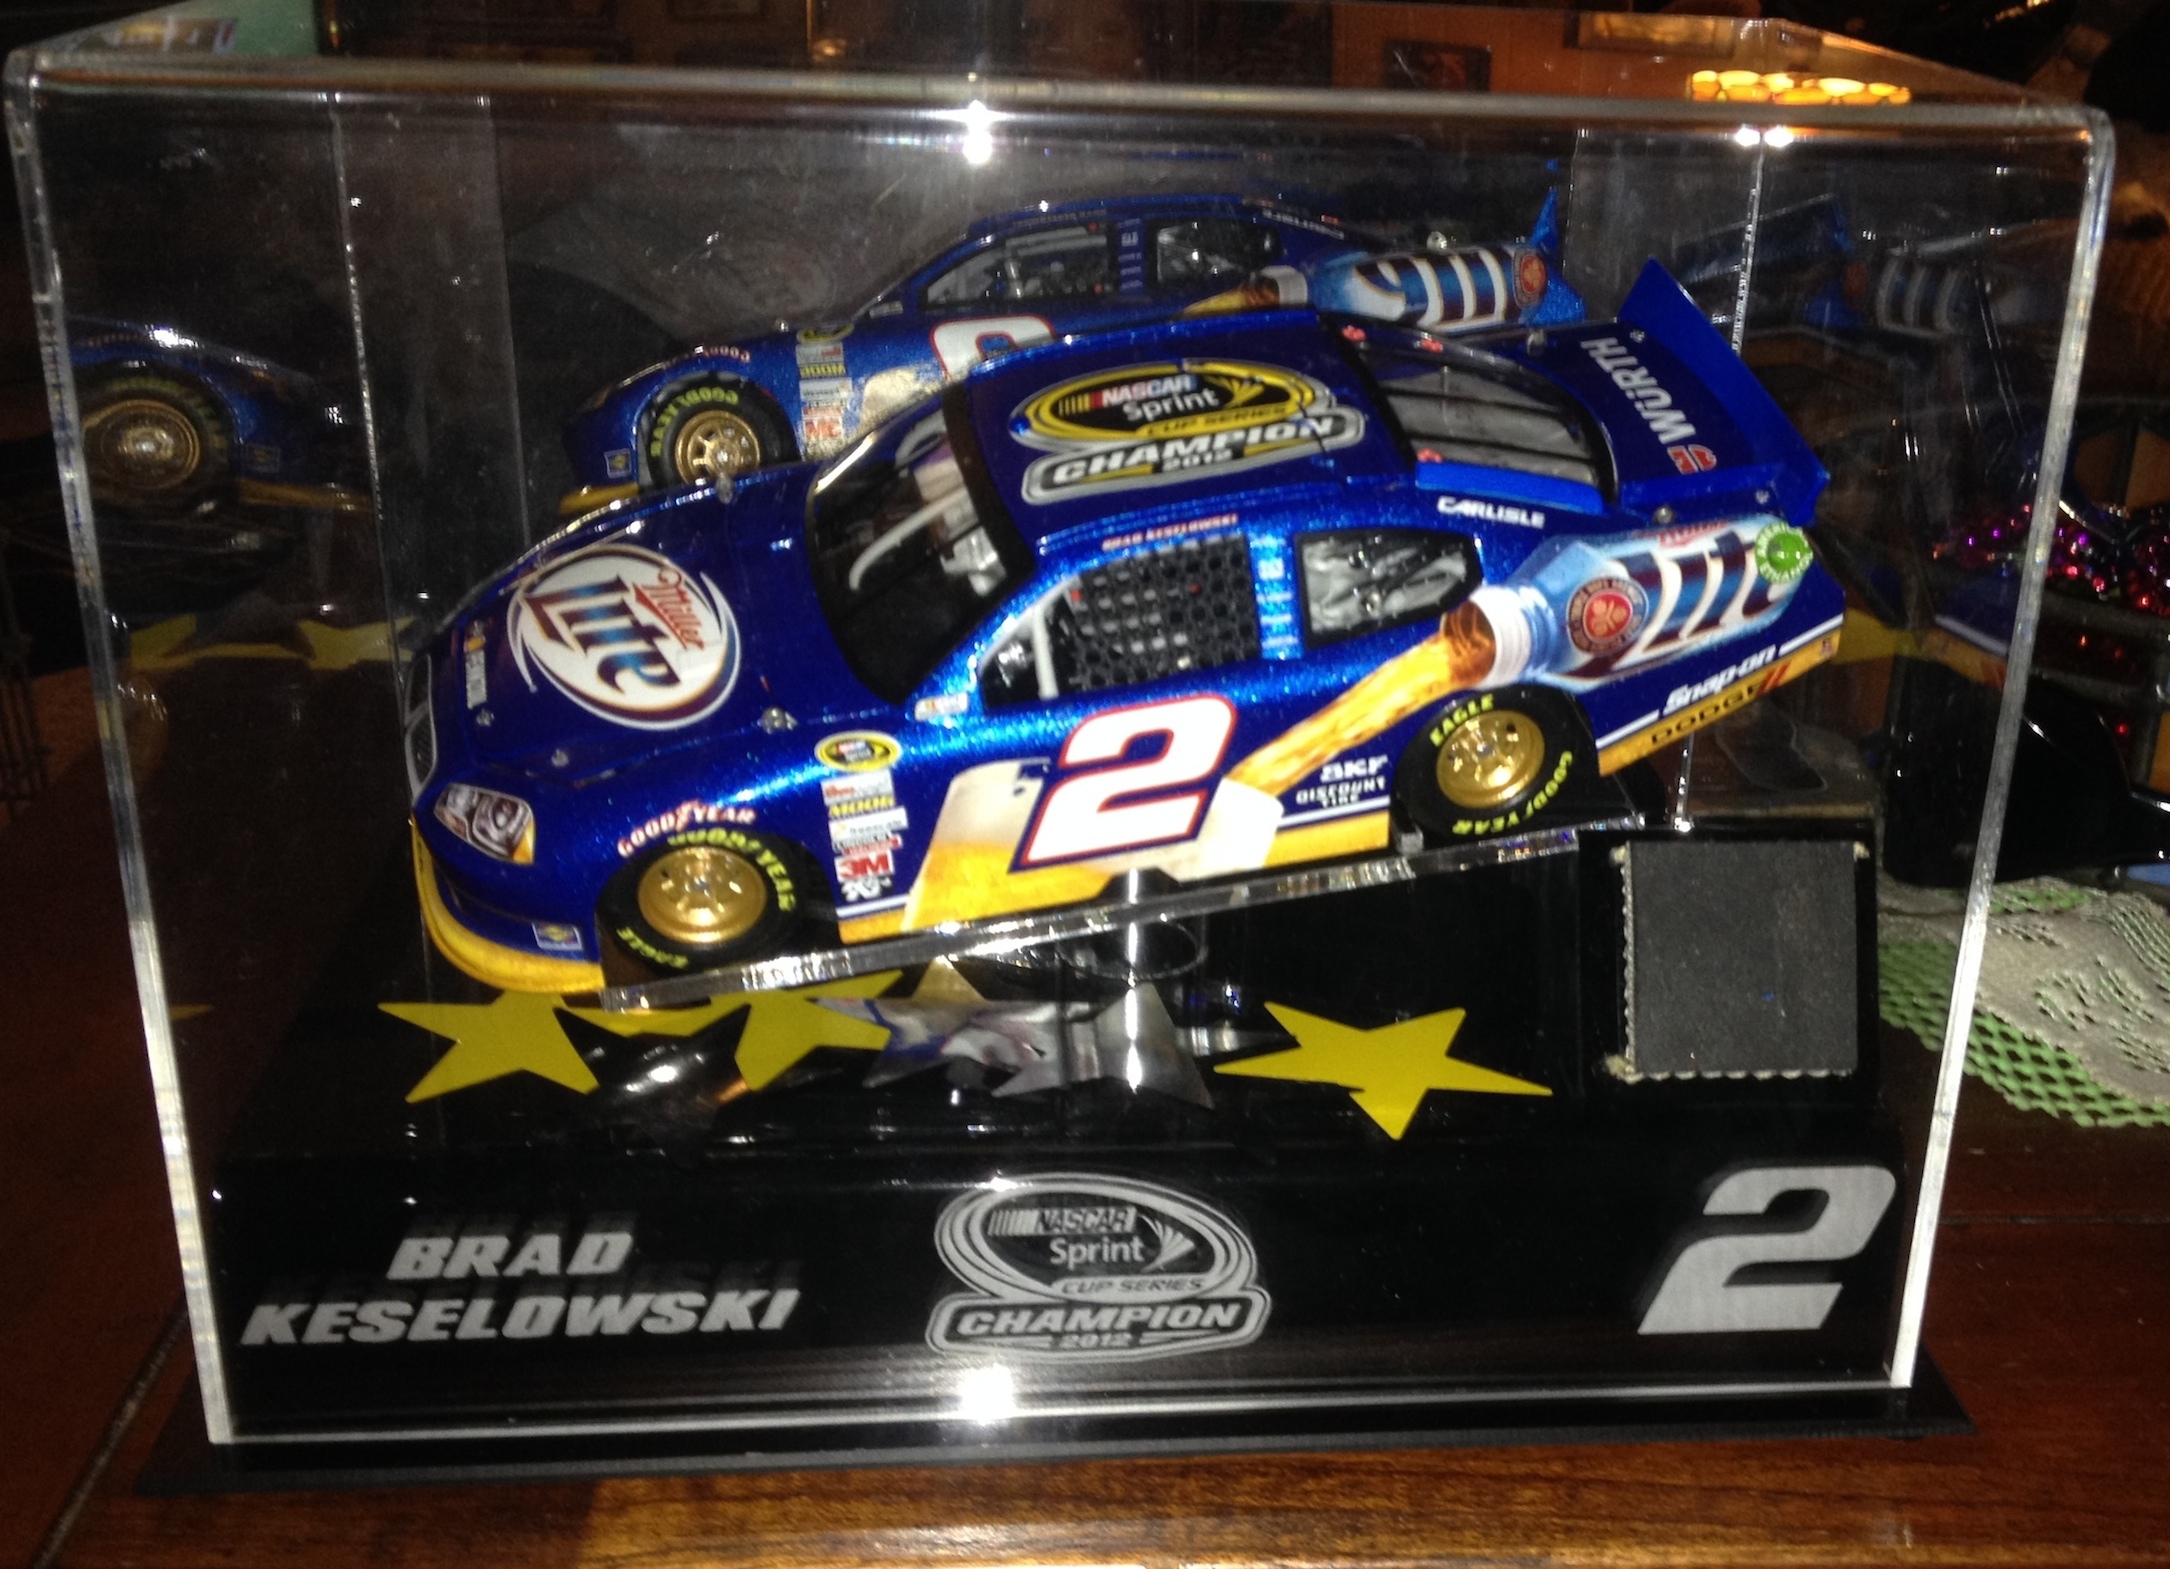 This is the 2012 Championship car in its special case.